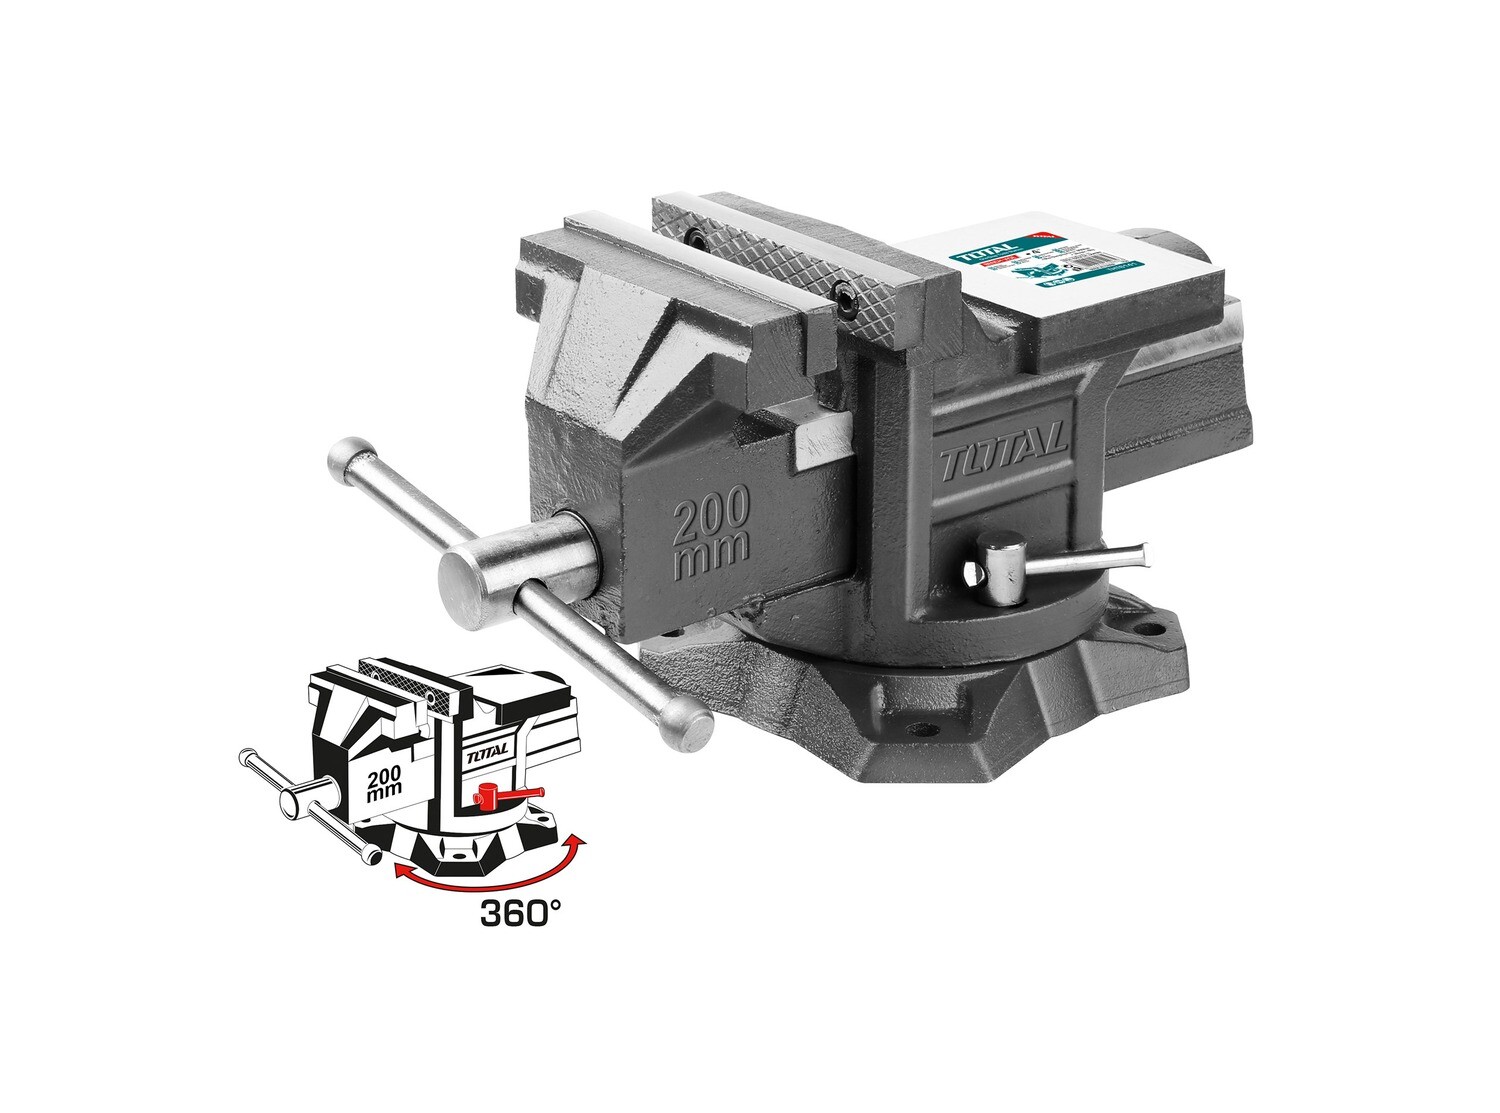 Total Bench Vice 8" - THT6186